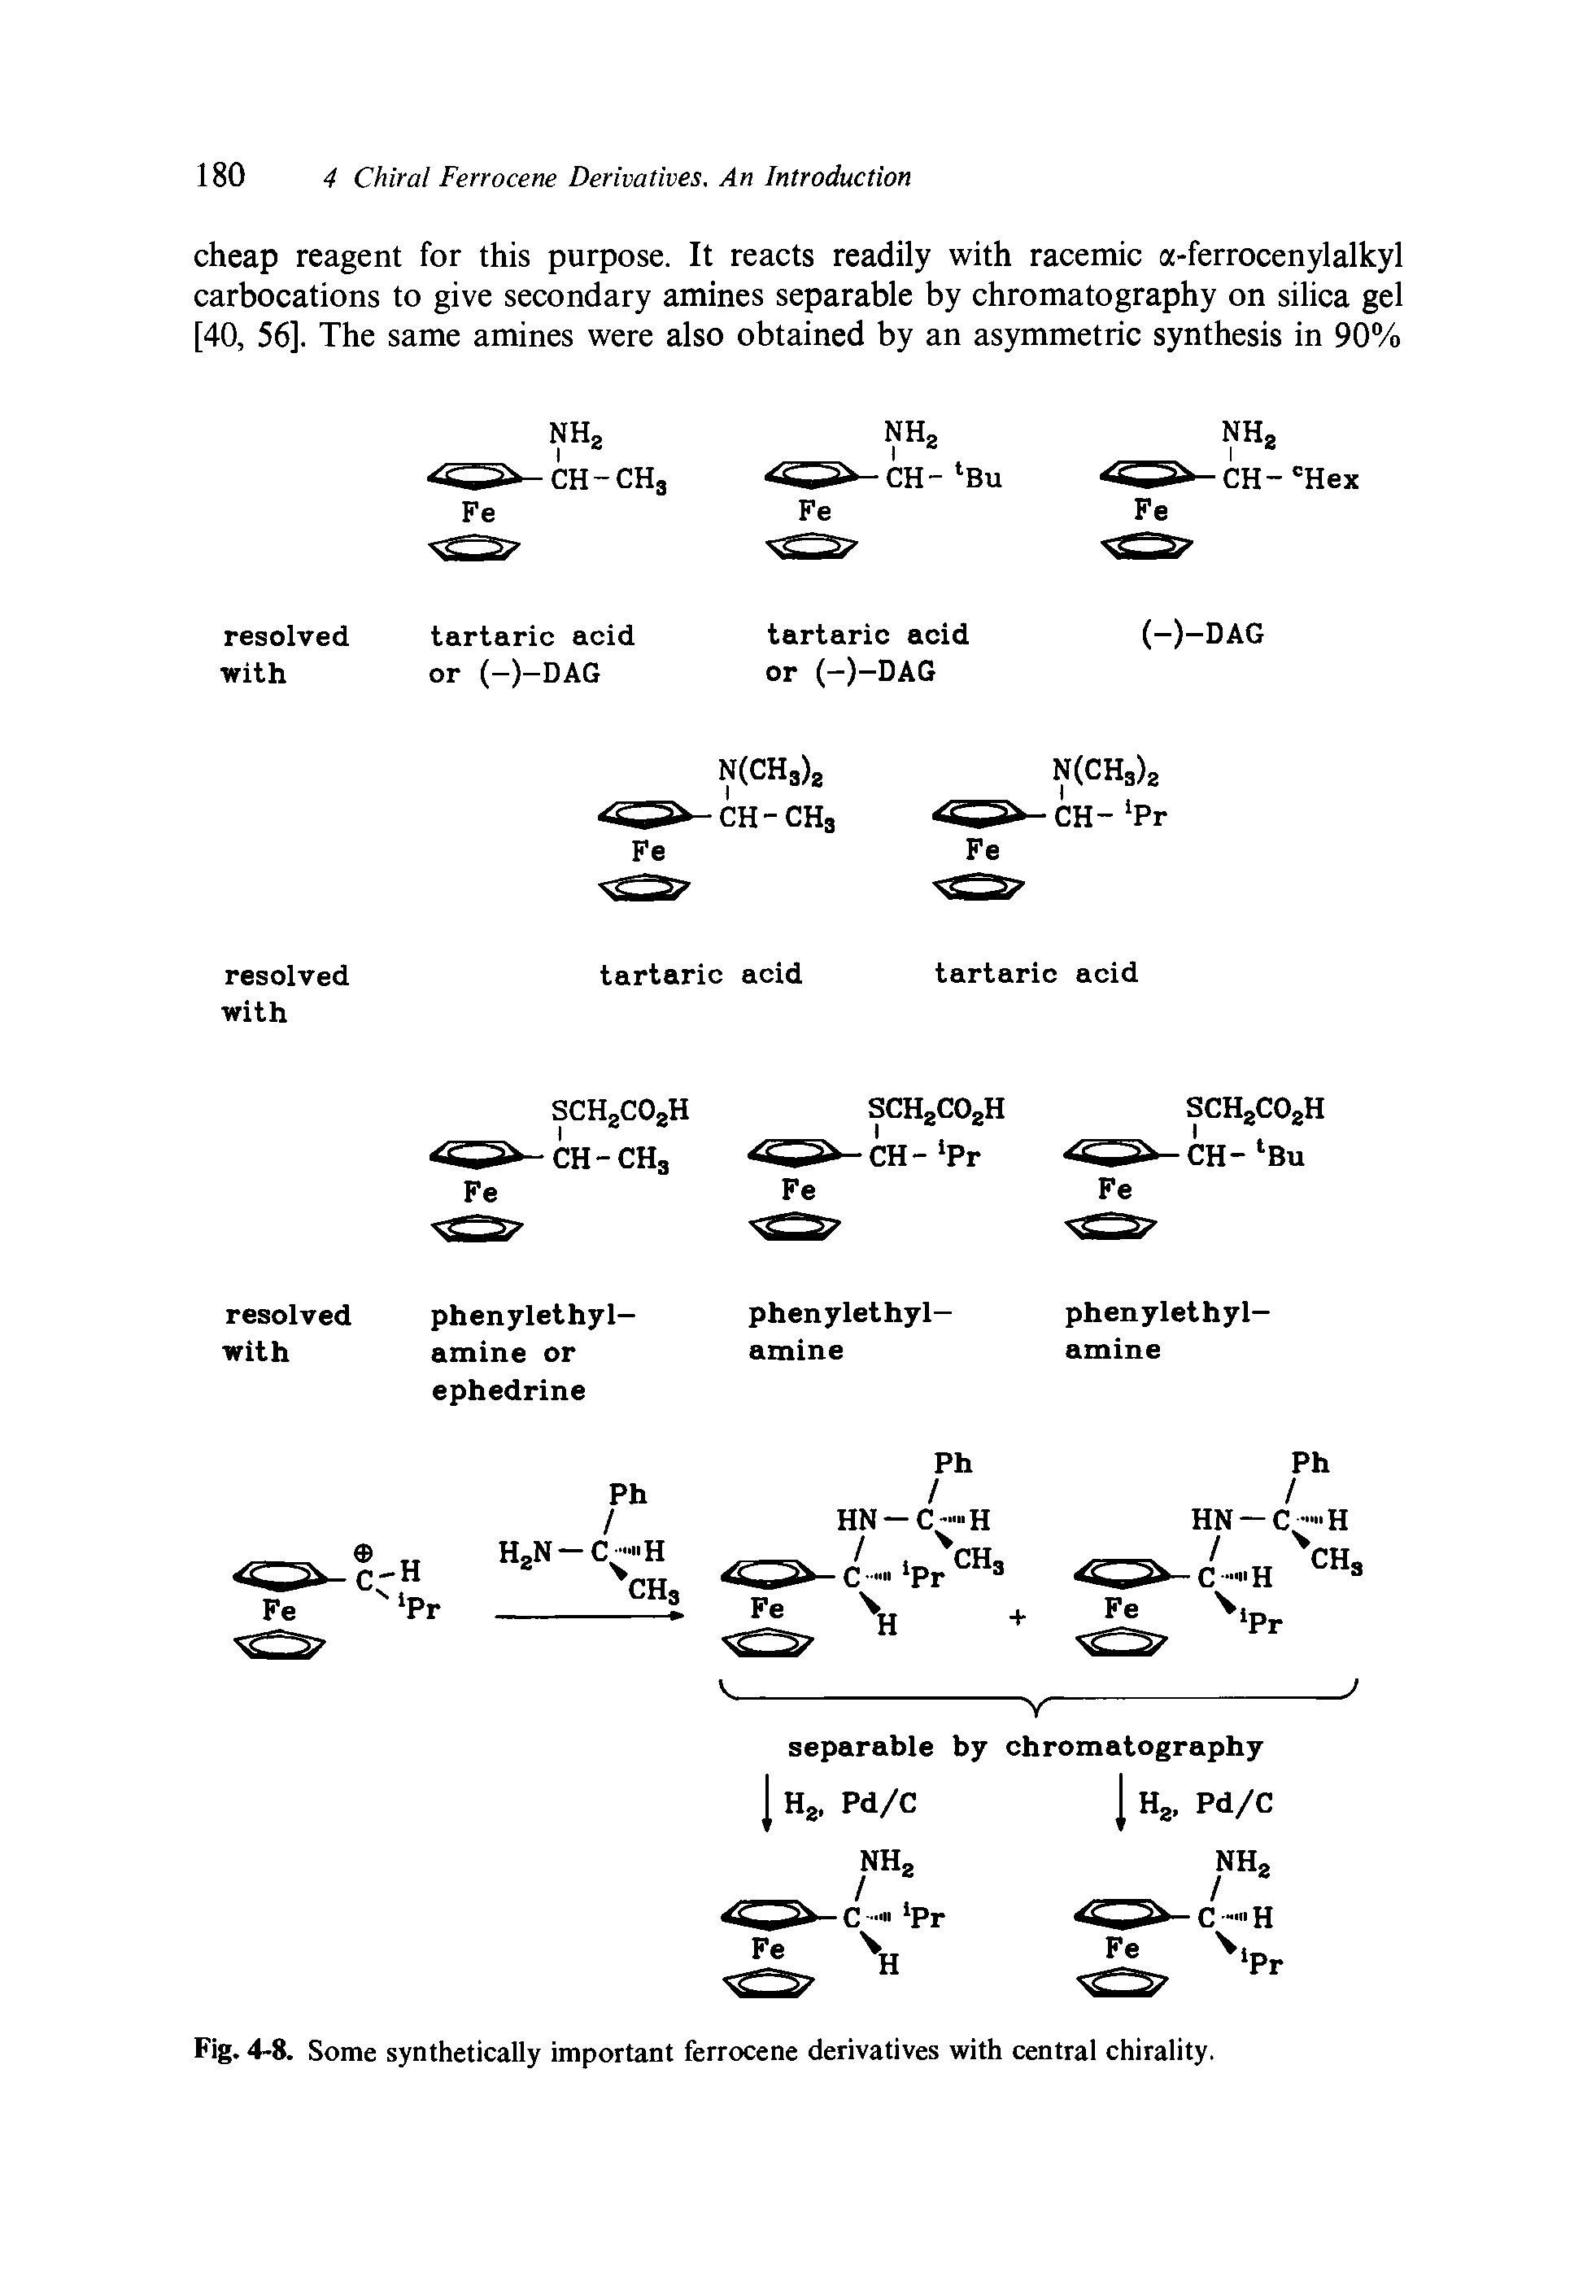 Fig. 4-8. Some synthetically important ferrocene derivatives with central chirality.